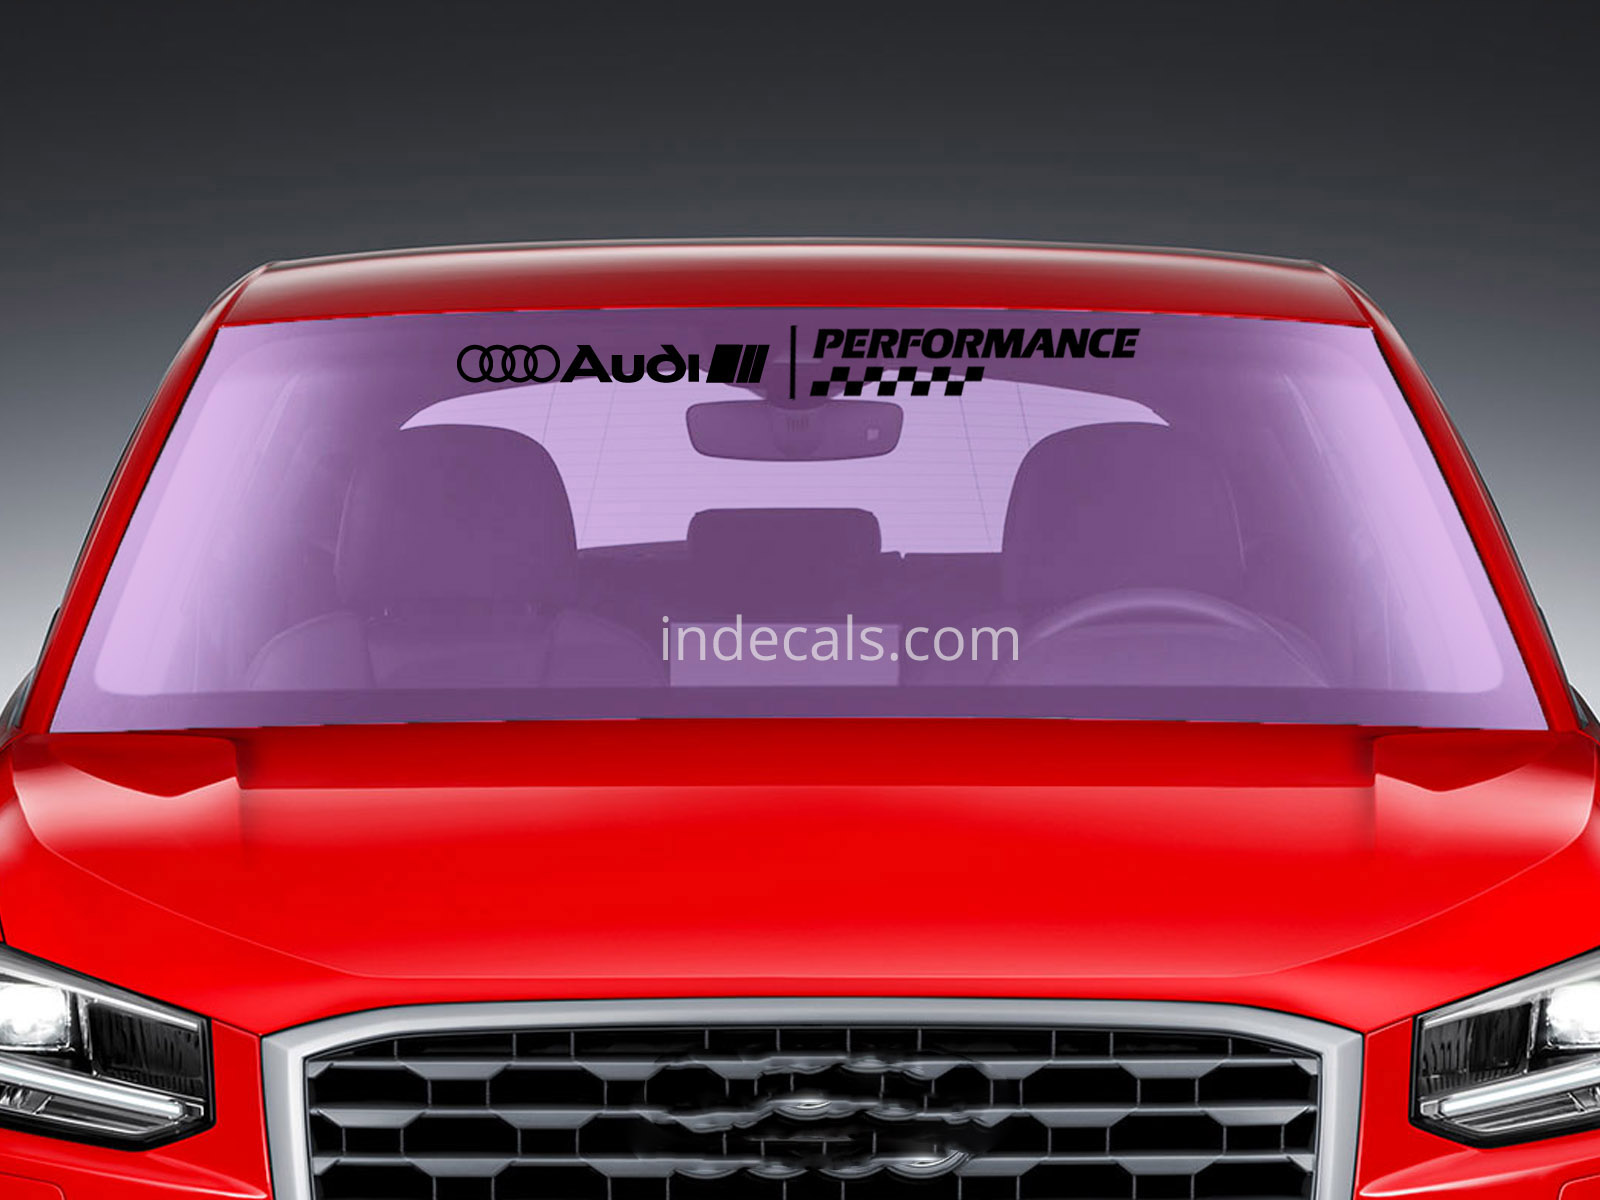 http://indecals.com/img/product/174-1-x-Audi-Performance-Sticker-for-Windshield-or-Back-Window--Black.jpg